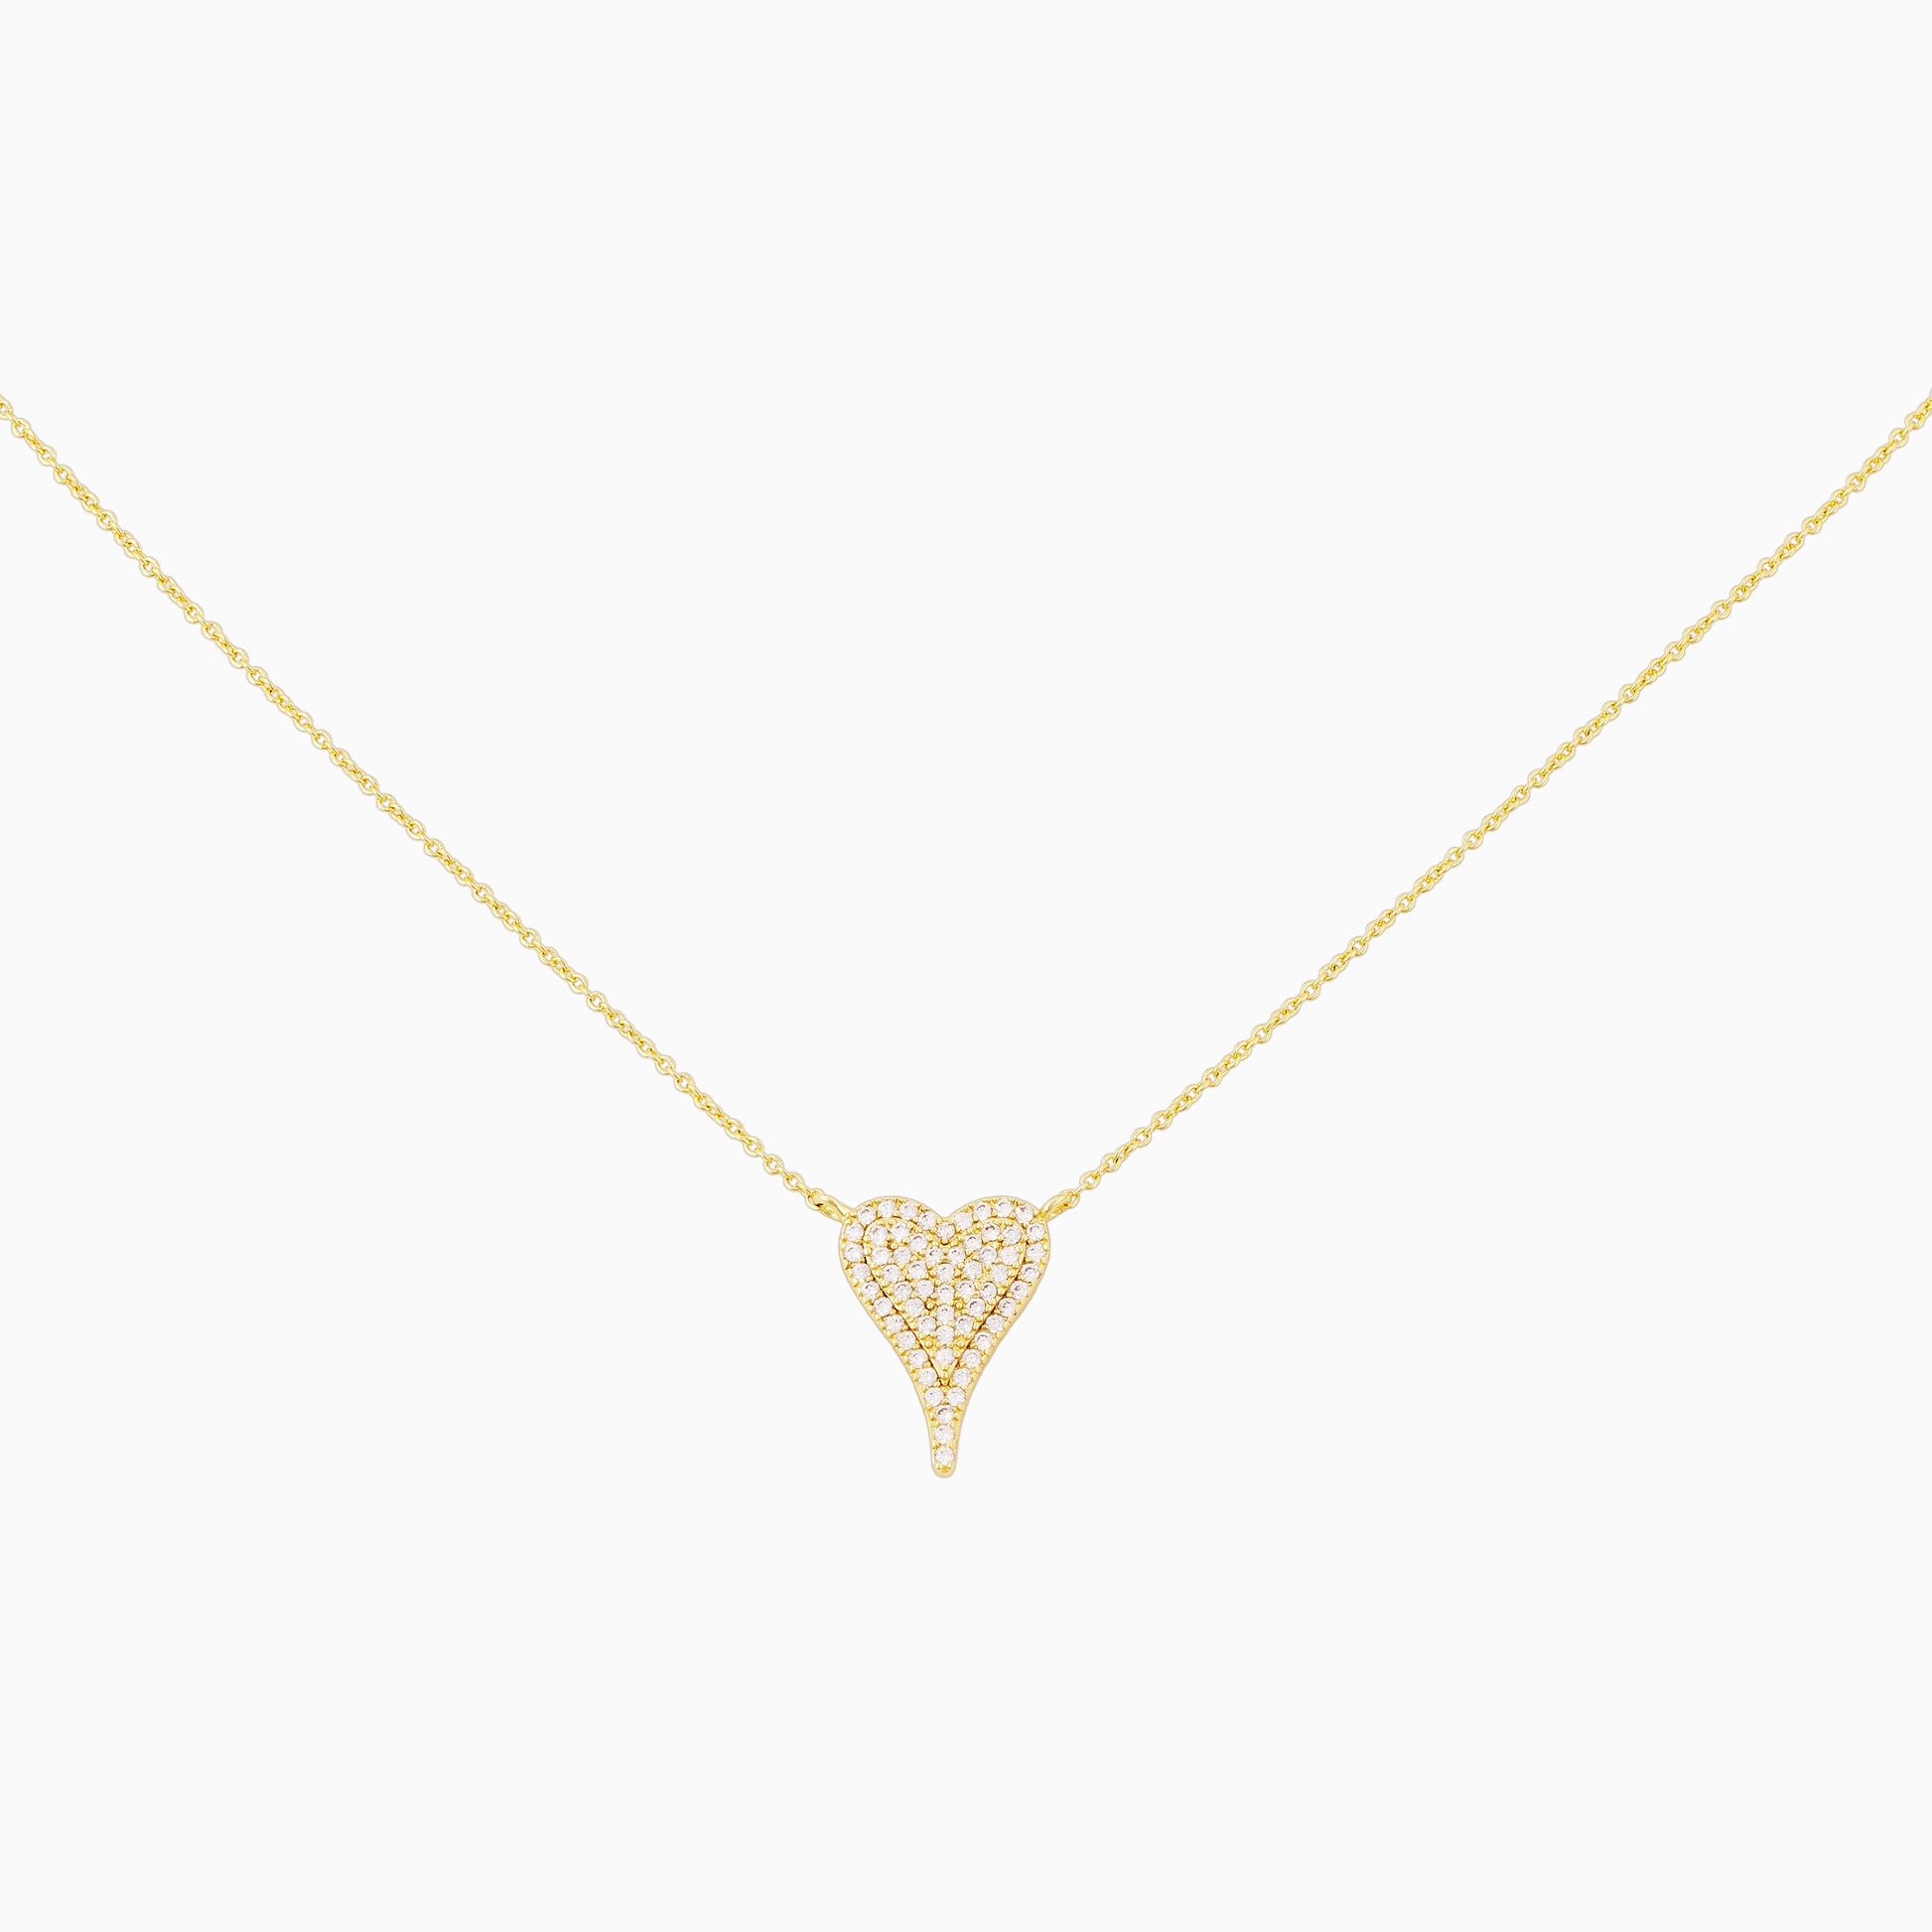 Simple Gold Necklace with Gold Pavé Cross Pendant | Women's Jewelry by Uncommon James